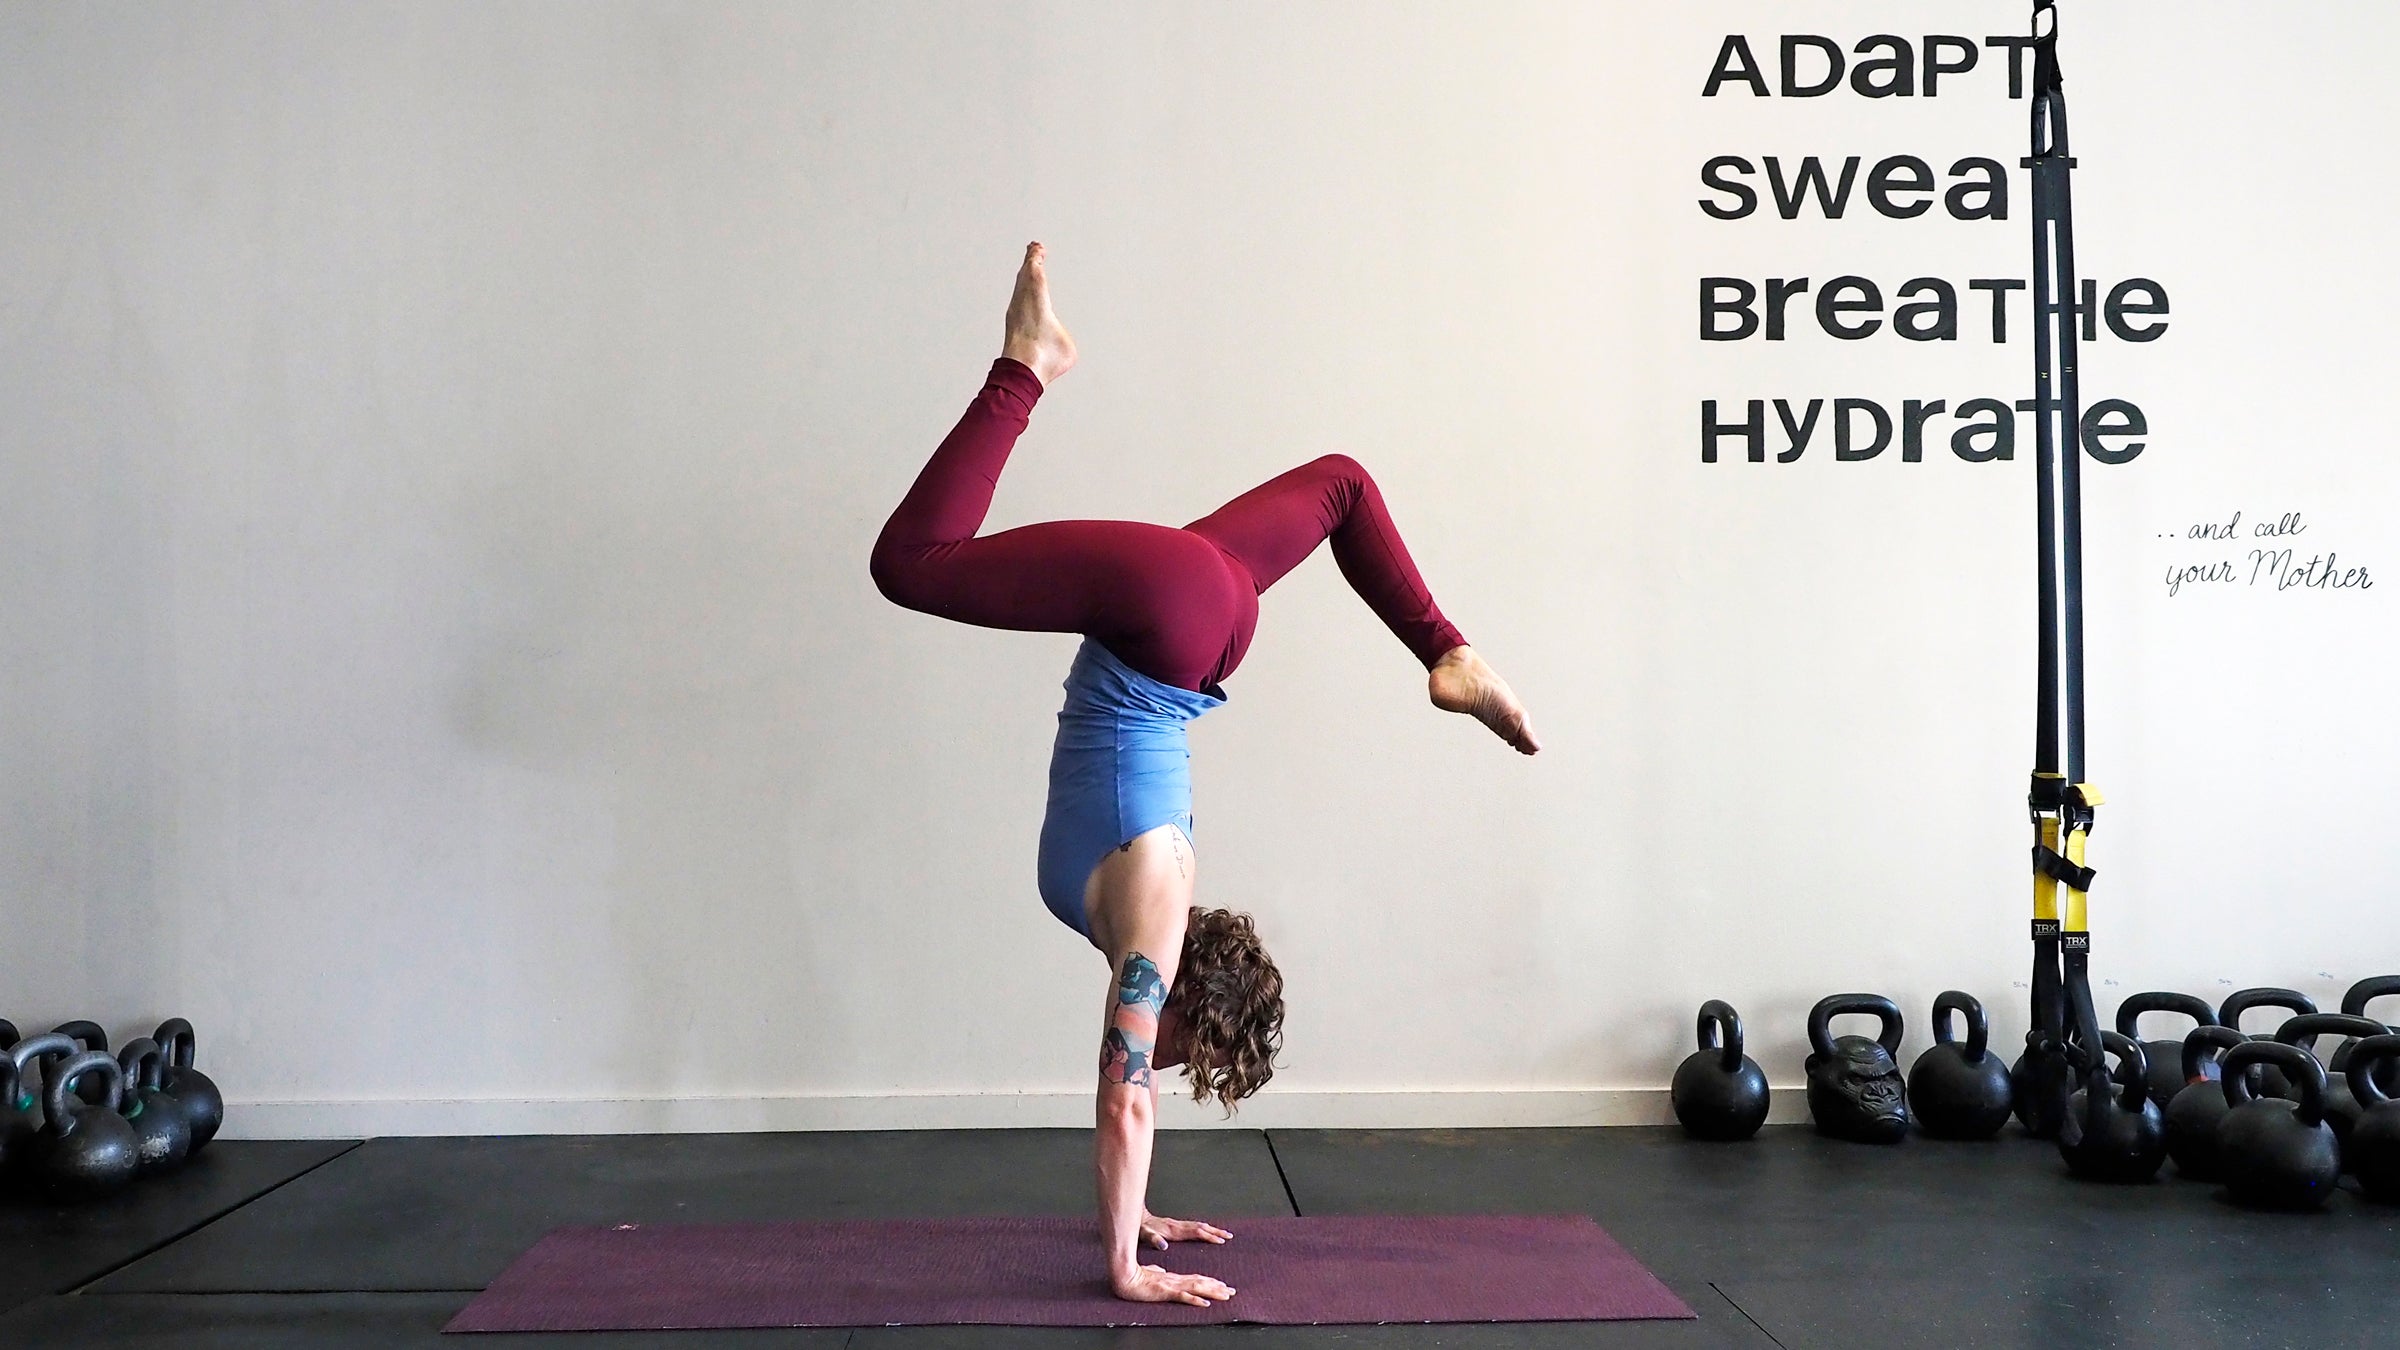 How to Do a Headstand: Step-by-Step Instructions & Safety Tips